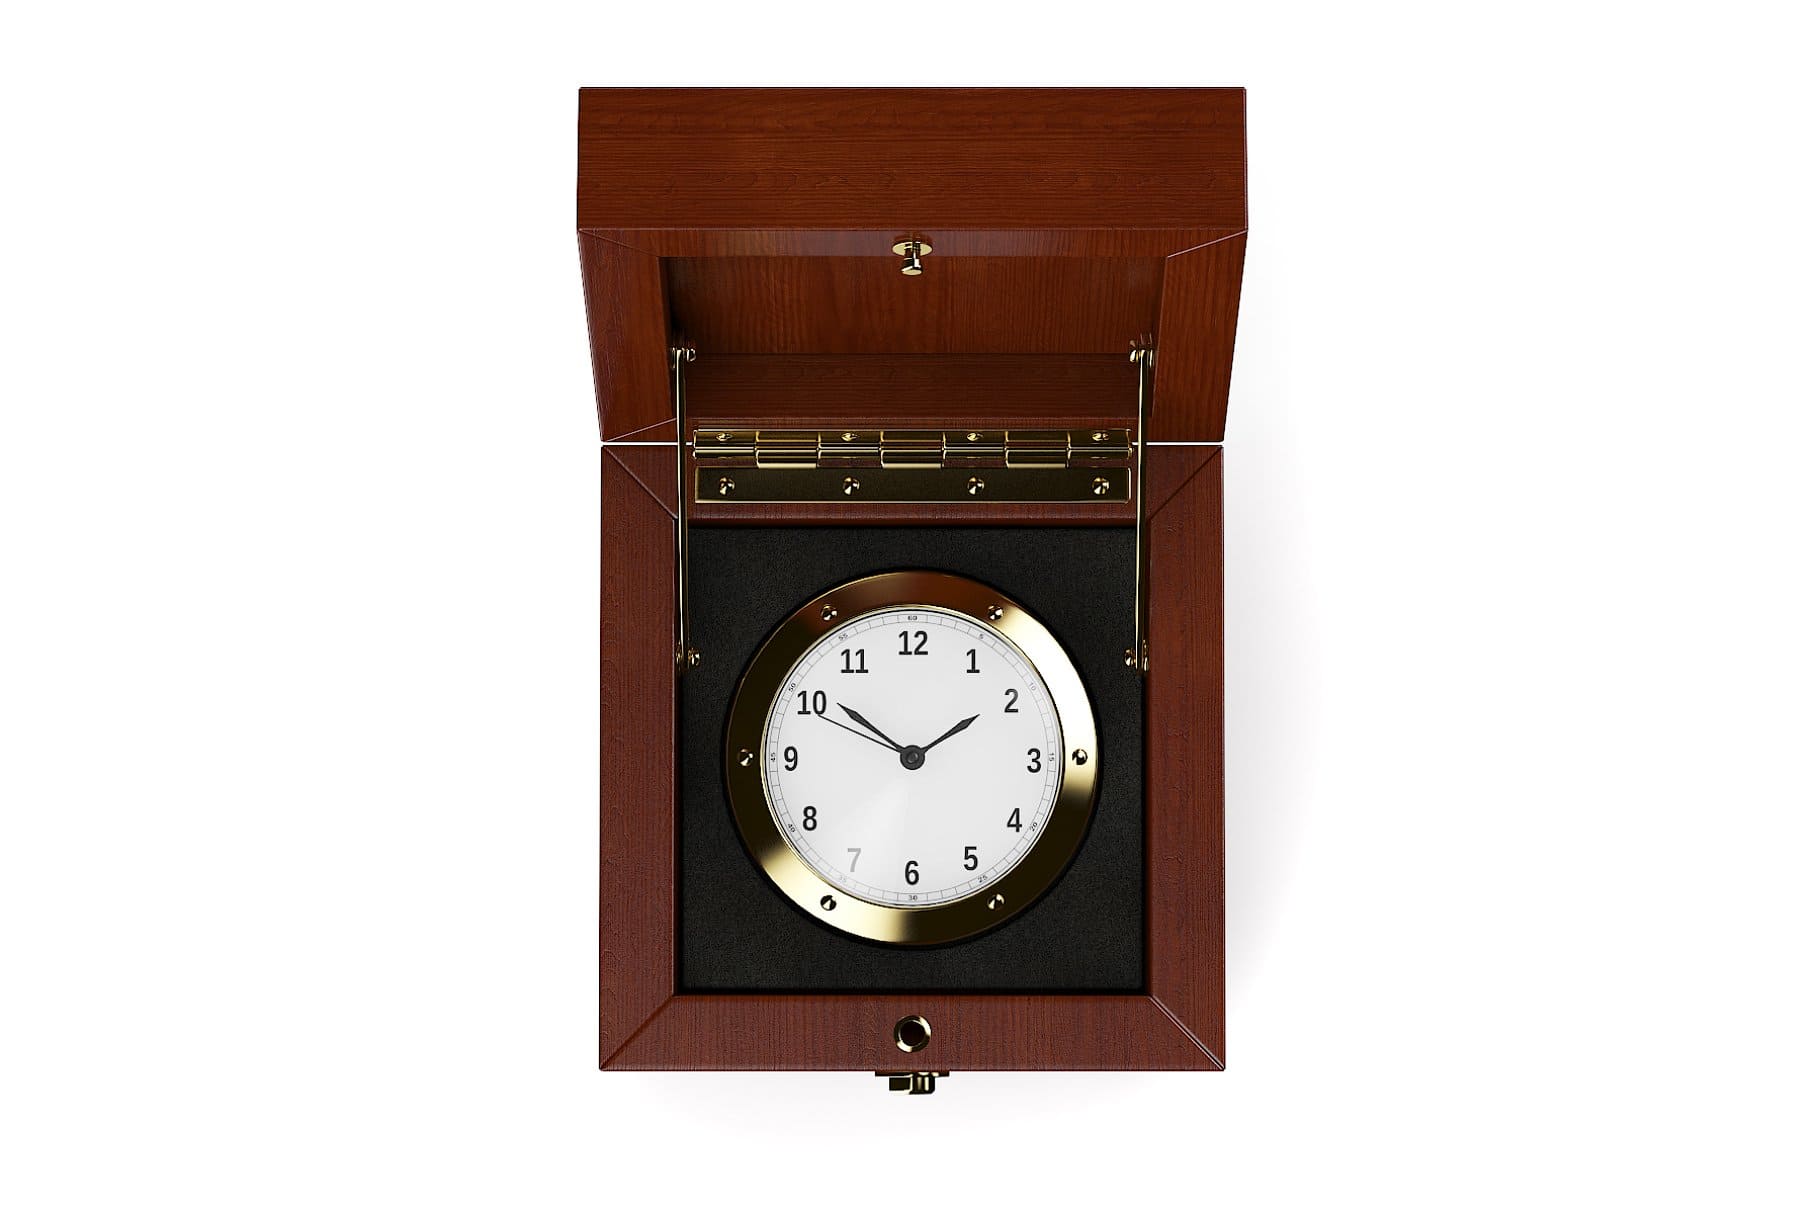 A gold watch with black numbers lies in a wooden box.